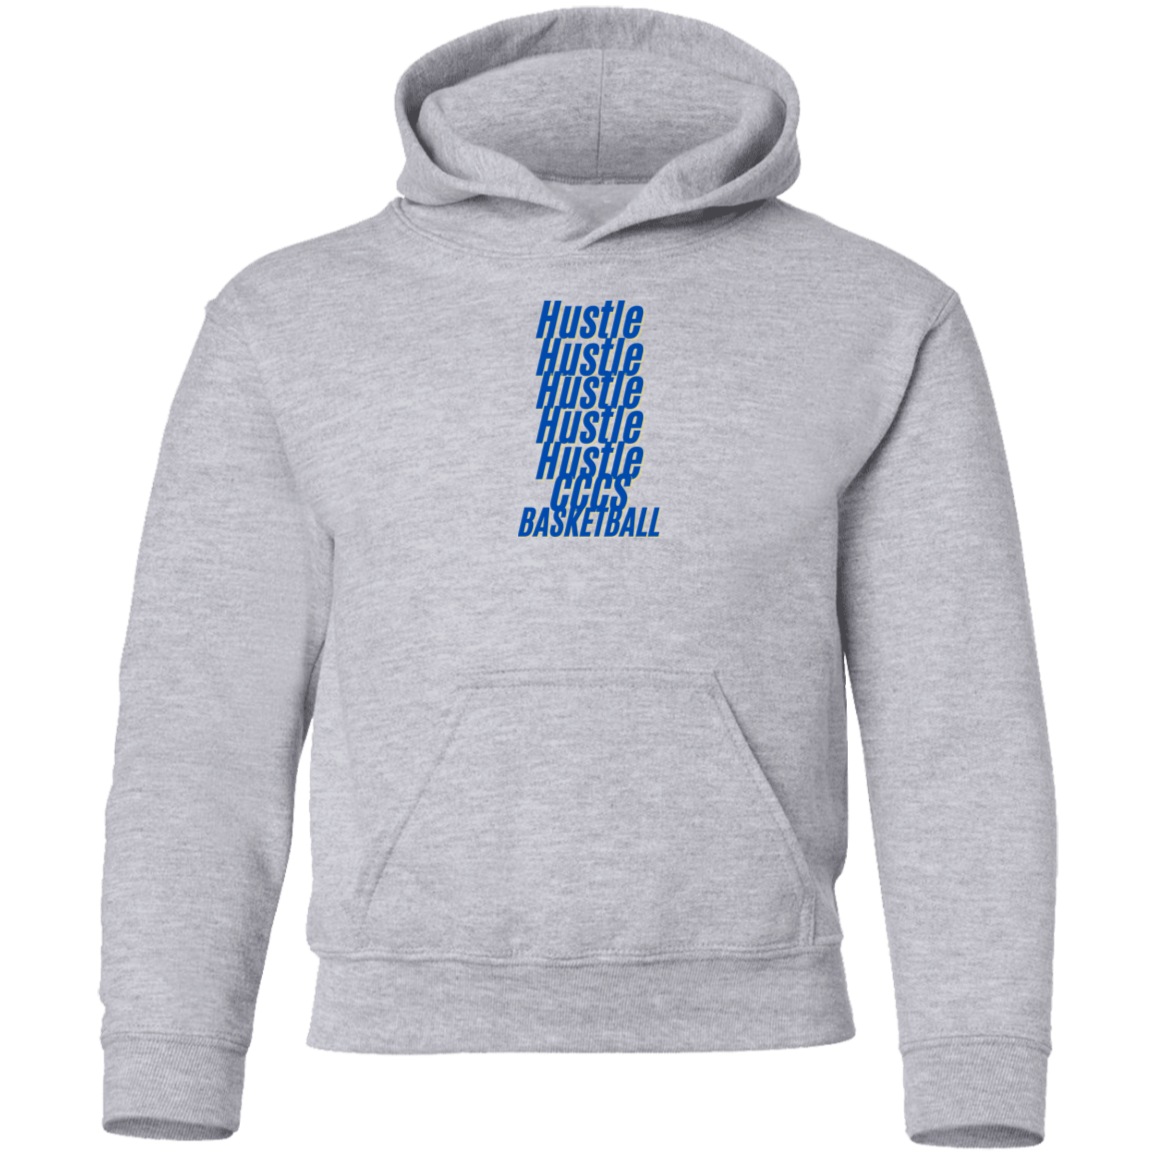 Hustle Youth Pullover Hoodie